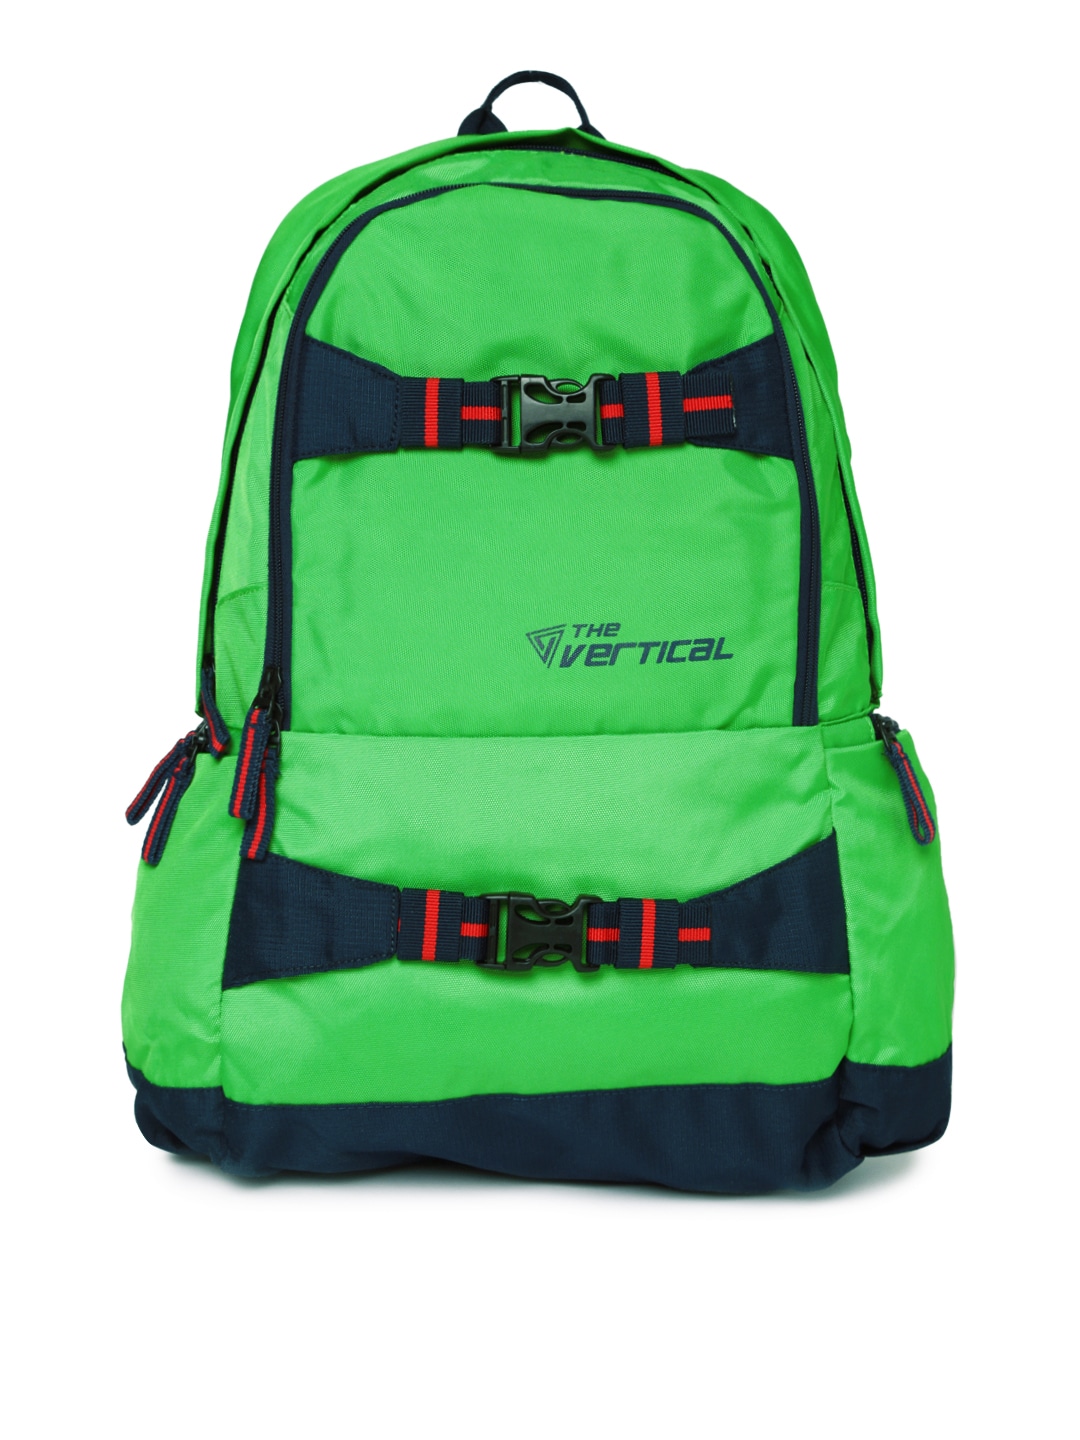 THe VerTicaL Unisex Green Laptop Backpack Price in India